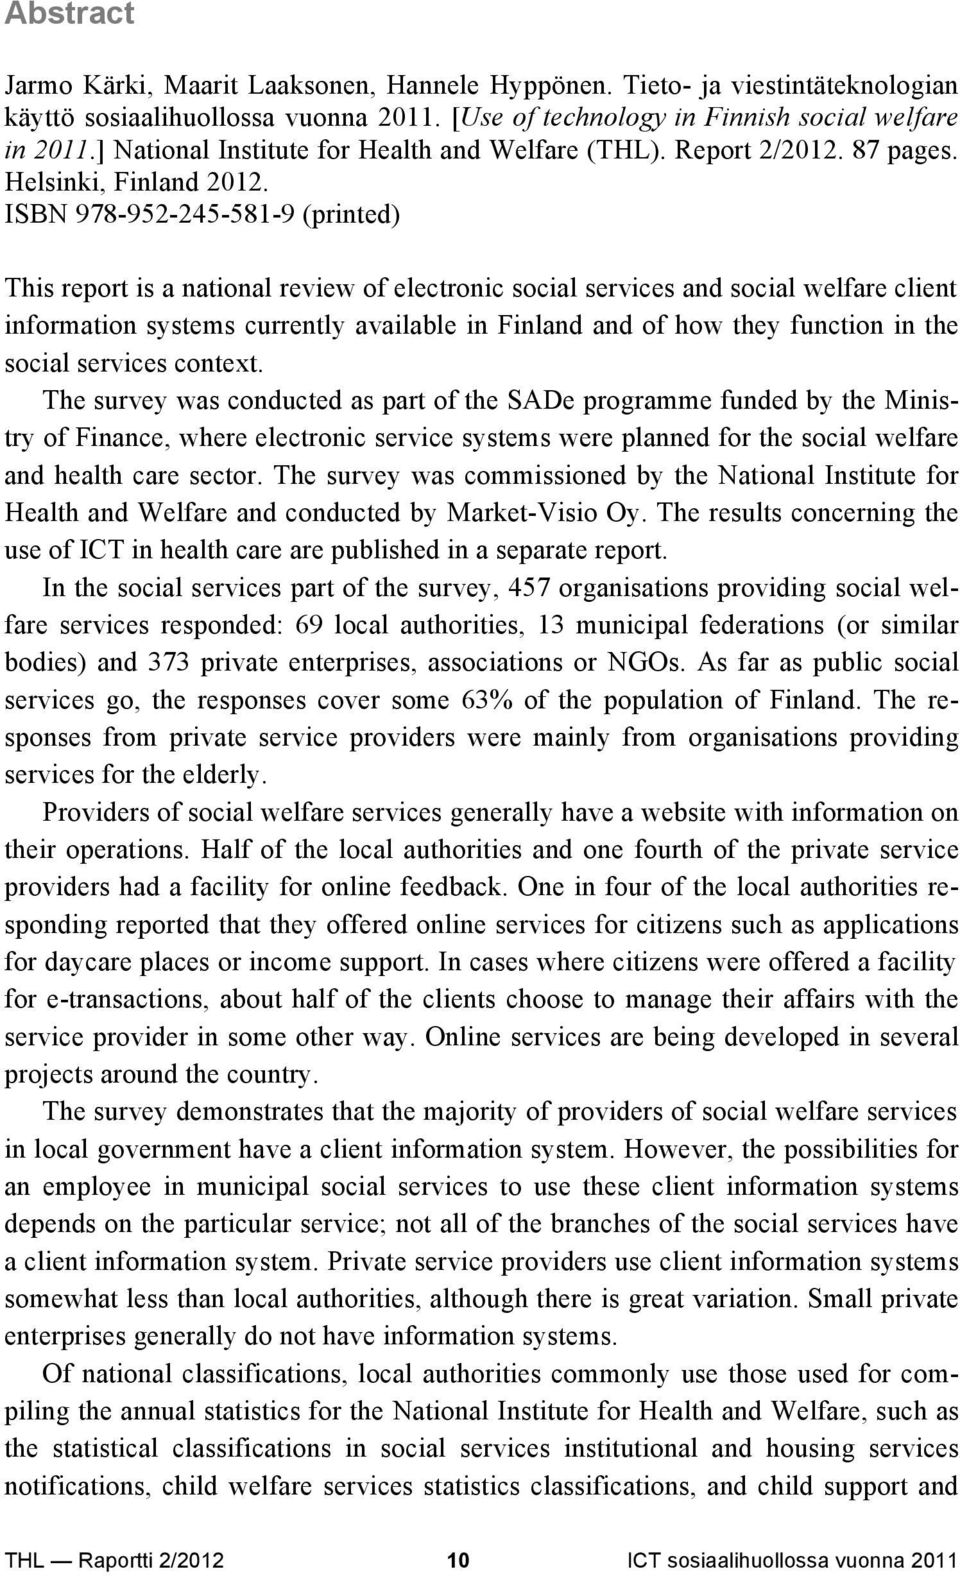 ISBN 978-952-245-581-9 (printed) This report is a national review of electronic social services and social welfare client information systems currently available in Finland and of how they function